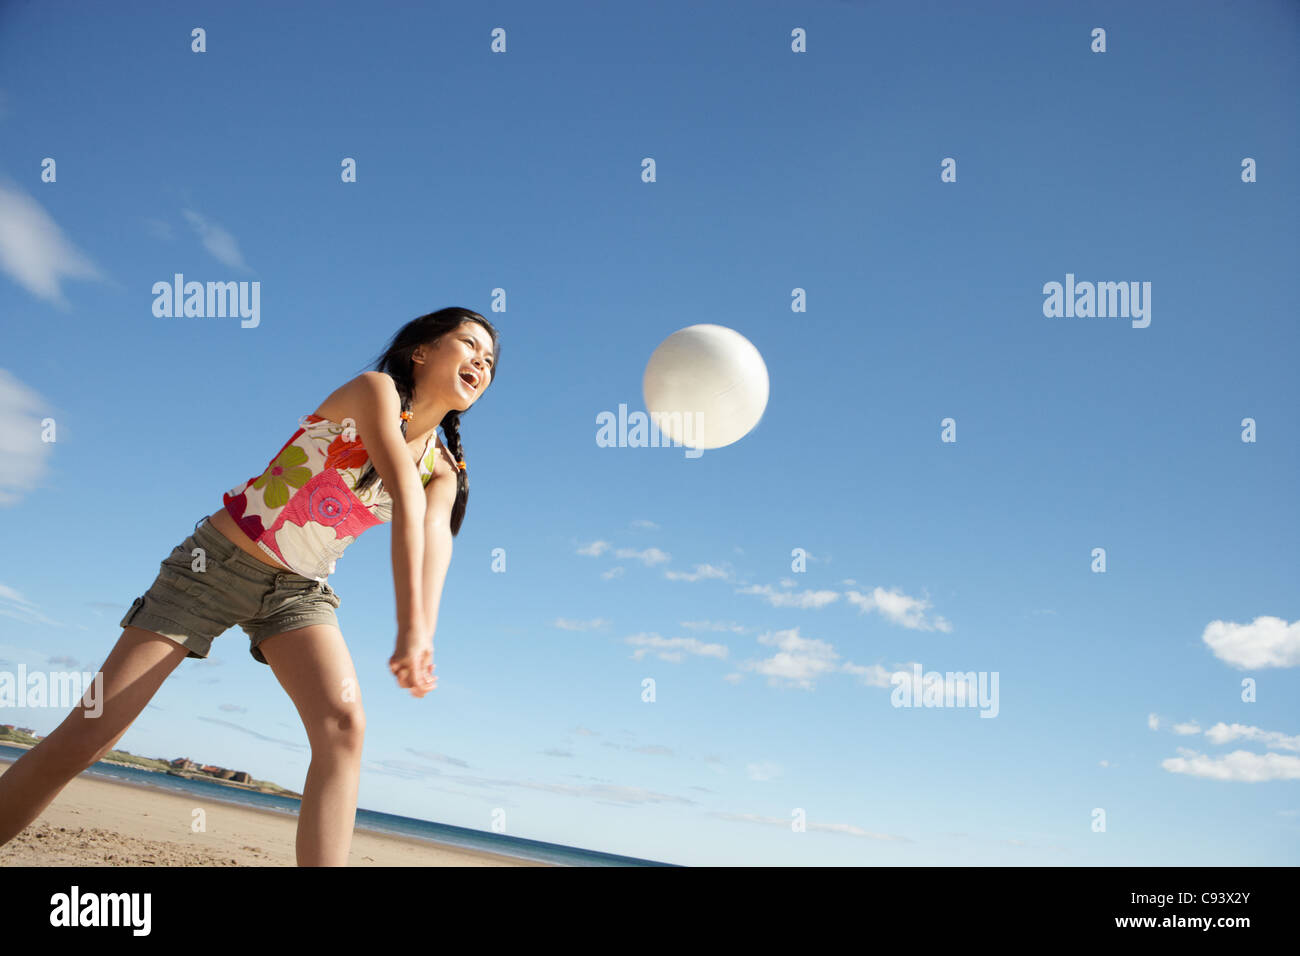 Teenage girl playing beach volleyball Banque D'Images